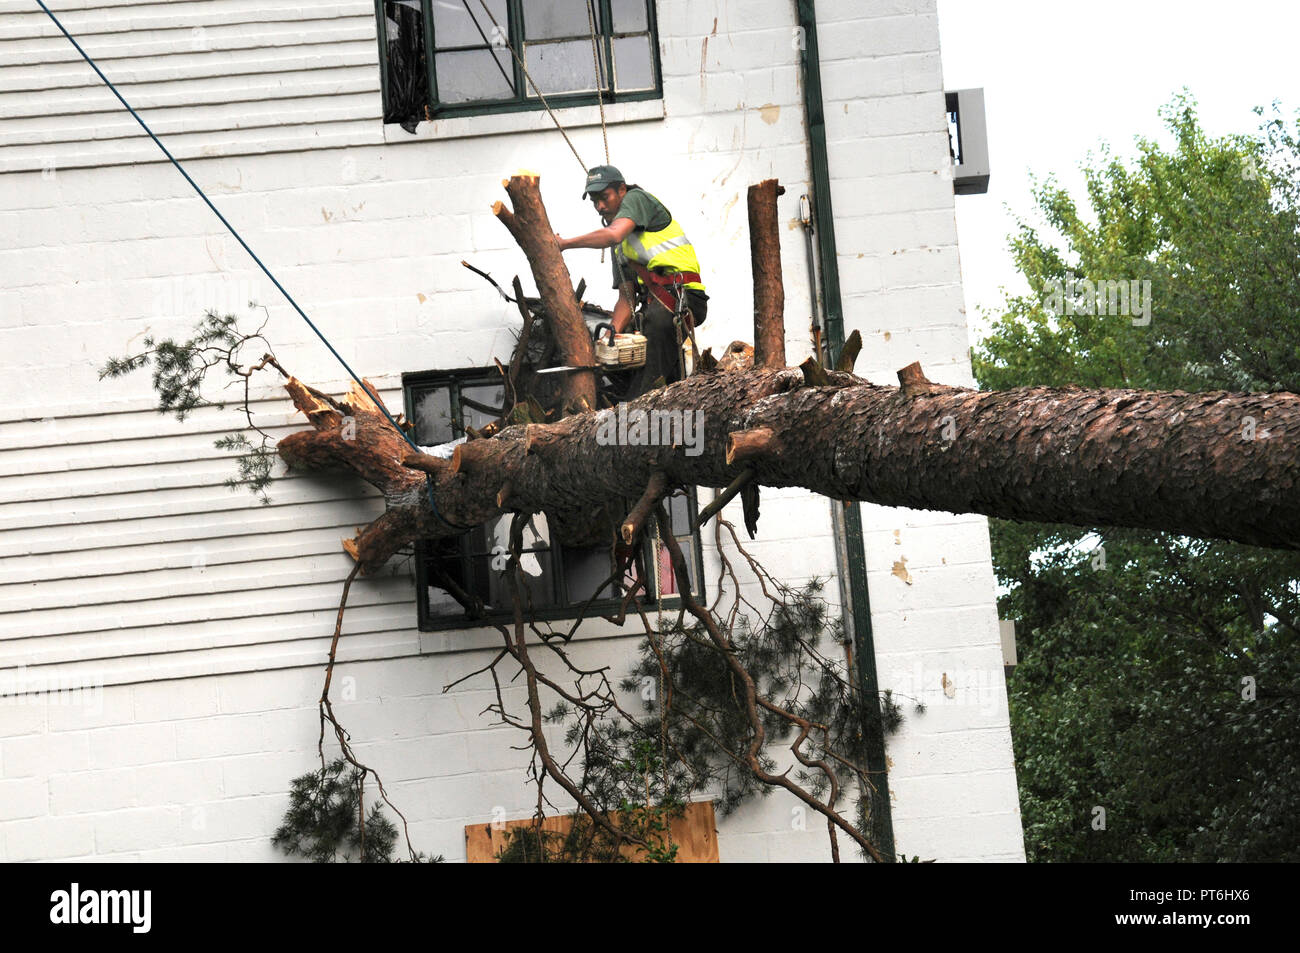 Workers work on removing a tree that crashed through a town house in Greenbelt after a severe storm Stock Photo